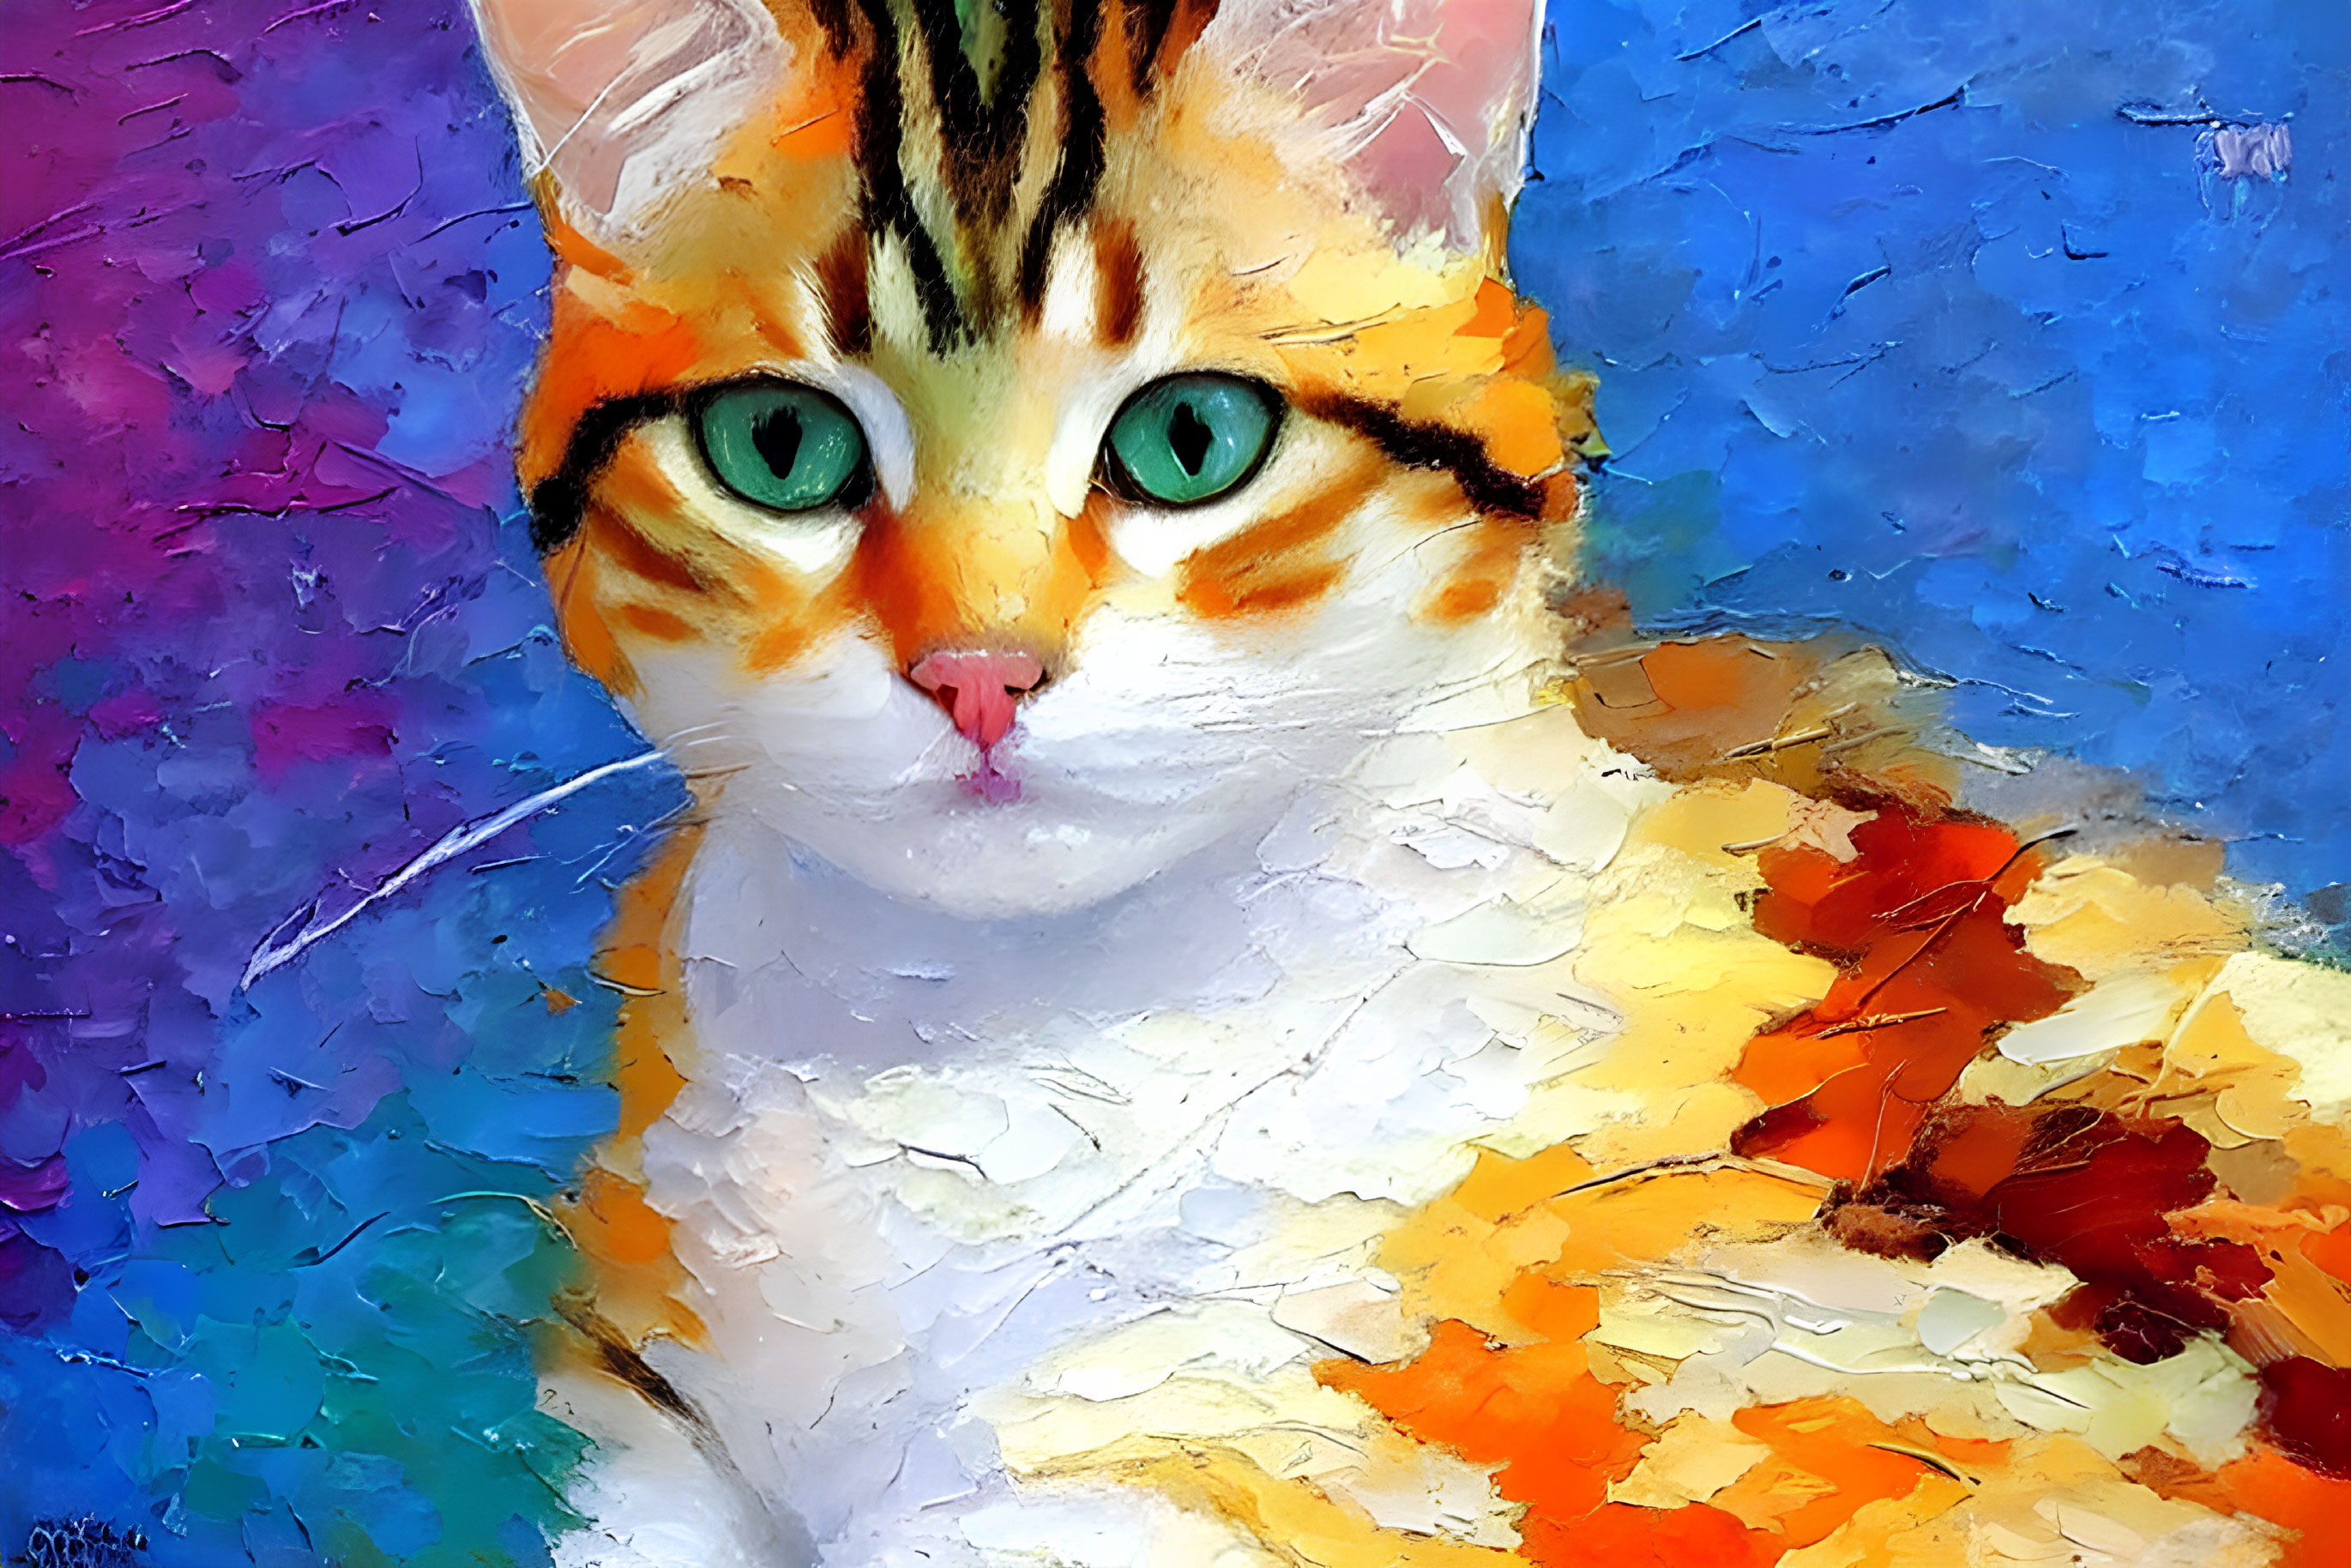 Vibrant cat illustration with green eyes and colorful patchwork fur